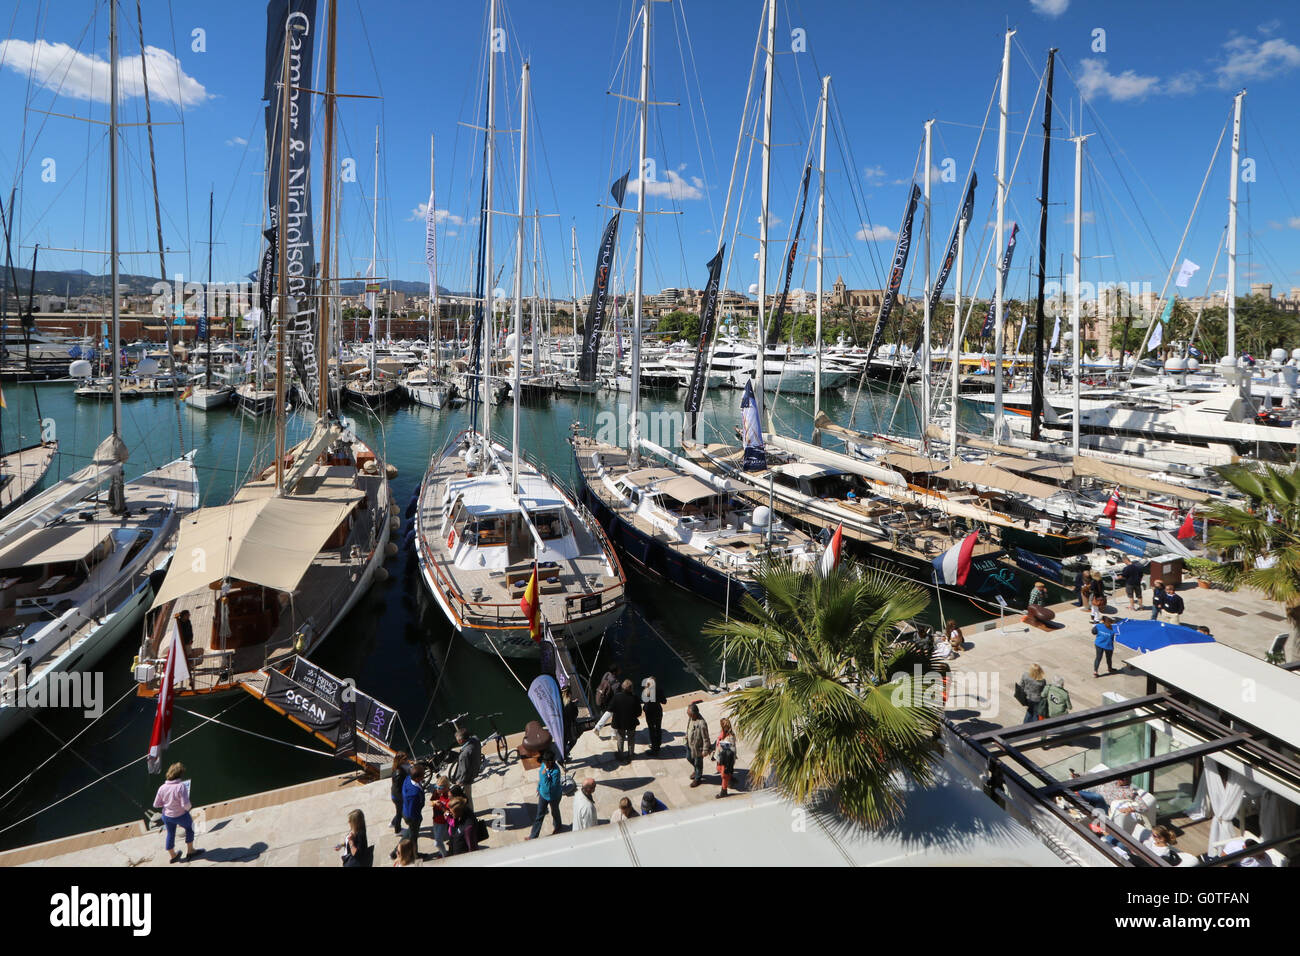 Images of Palma International Boat Show 2016 and Palma Superyacht Show 2016 - luxury sailing superyachts in foreground + yachts Stock Photo